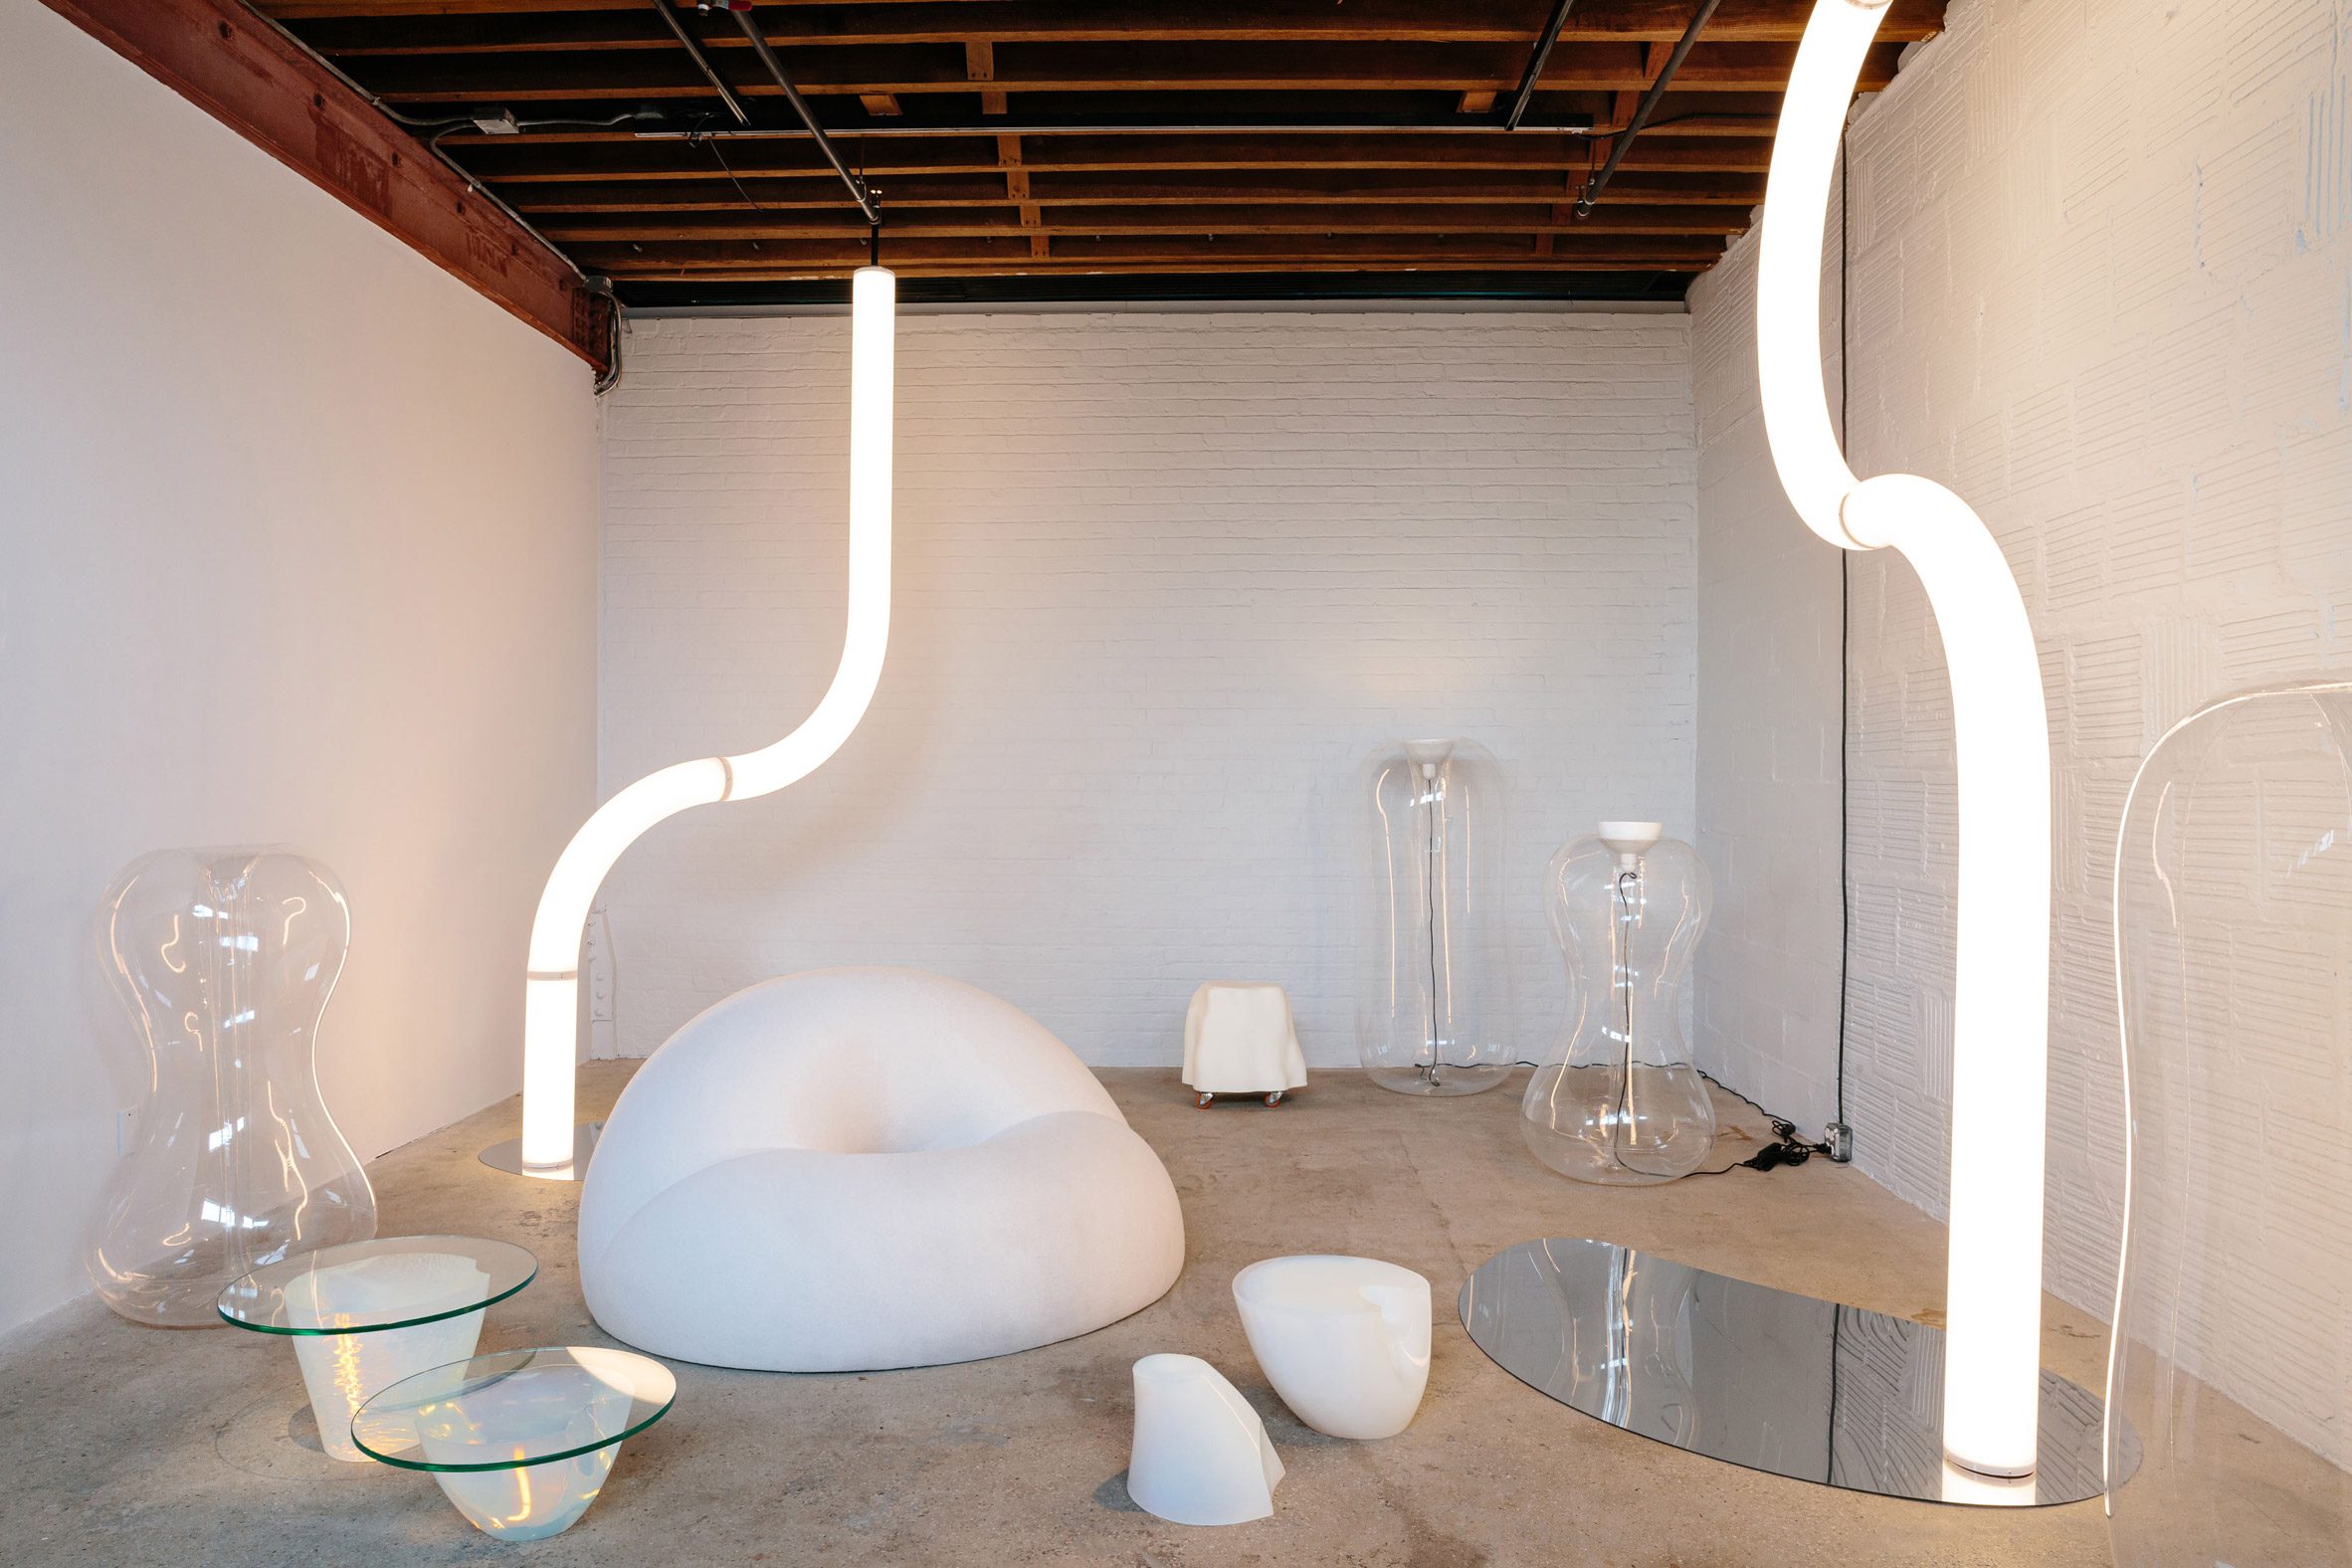 Room with white furniture and tubular lights